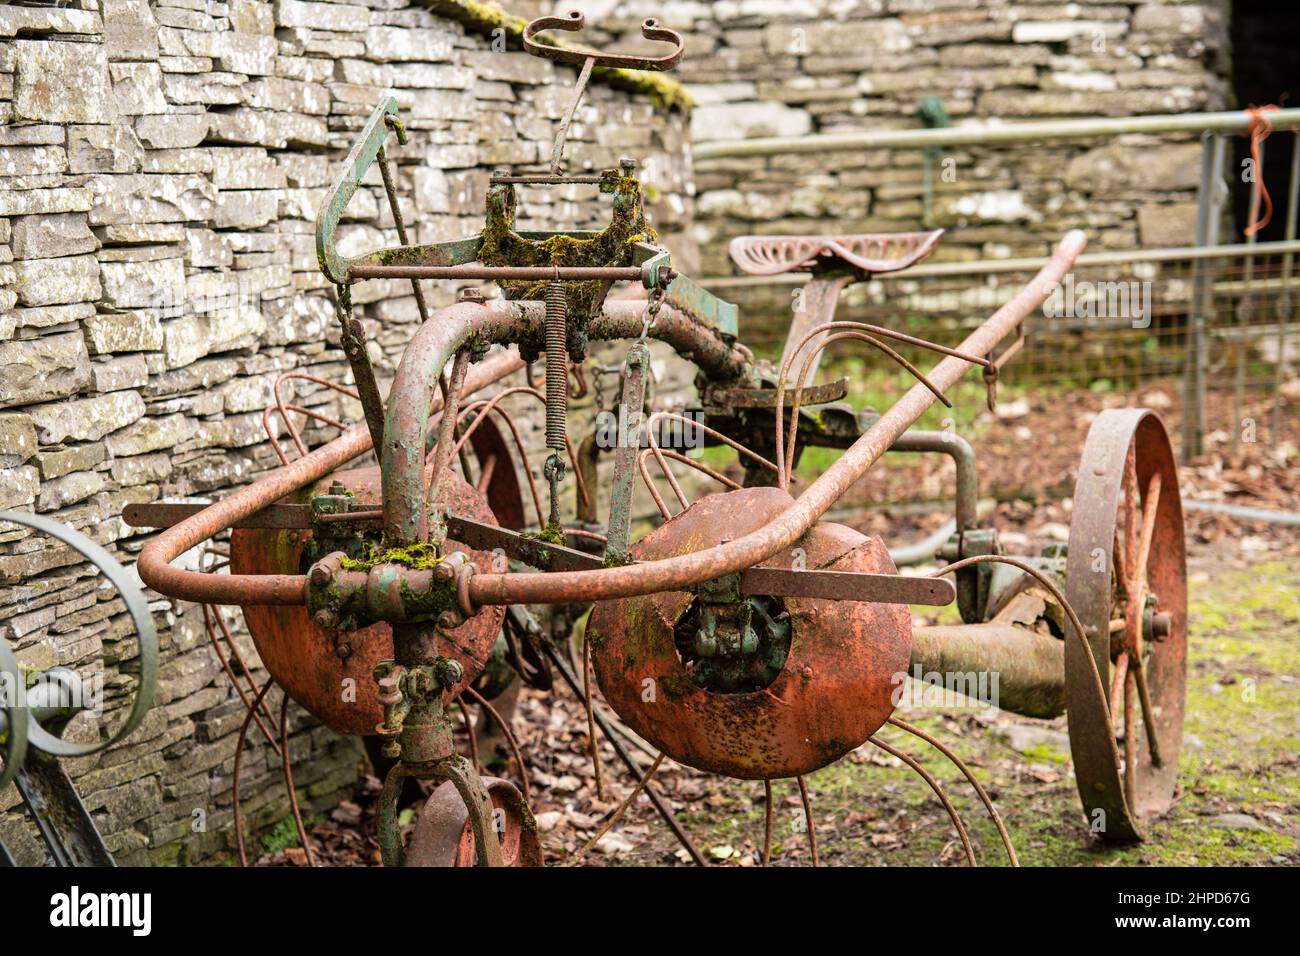 Bunratty, Ireland,03,02,2022,old antique farm machinery, old ways of working on farms Stock Photo